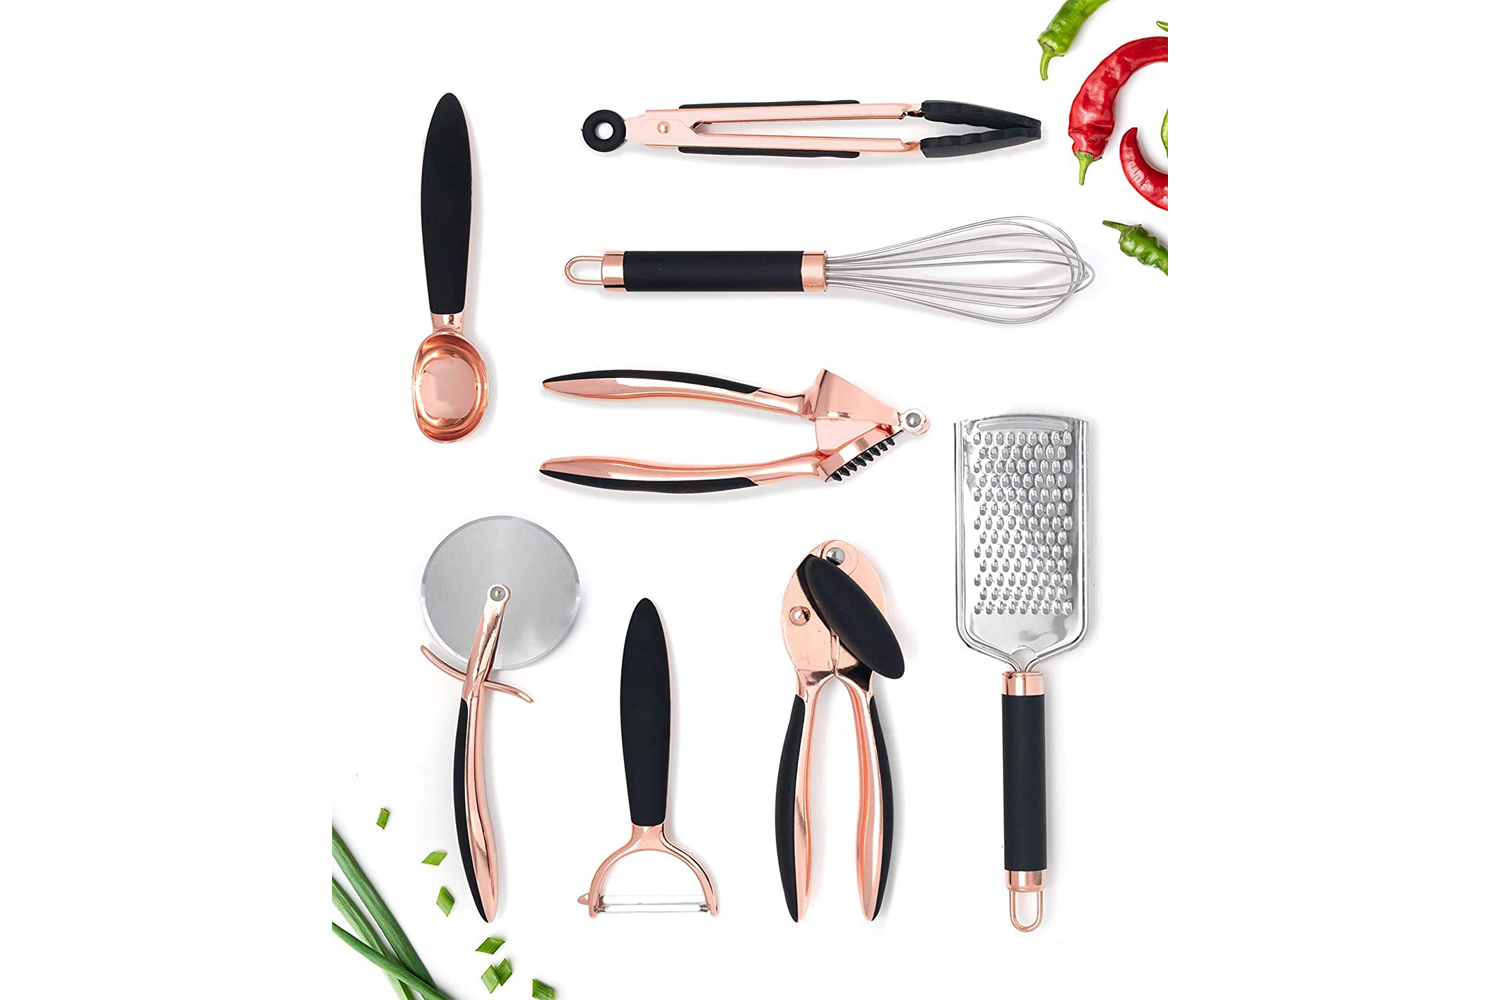 https://www.themanual.com/wp-content/uploads/sites/9/2021/09/styled-settings-luxe-8-piece-copper-kitchen-gadget-set-with-anti-slip-handles.jpg?fit=800%2C800&p=1